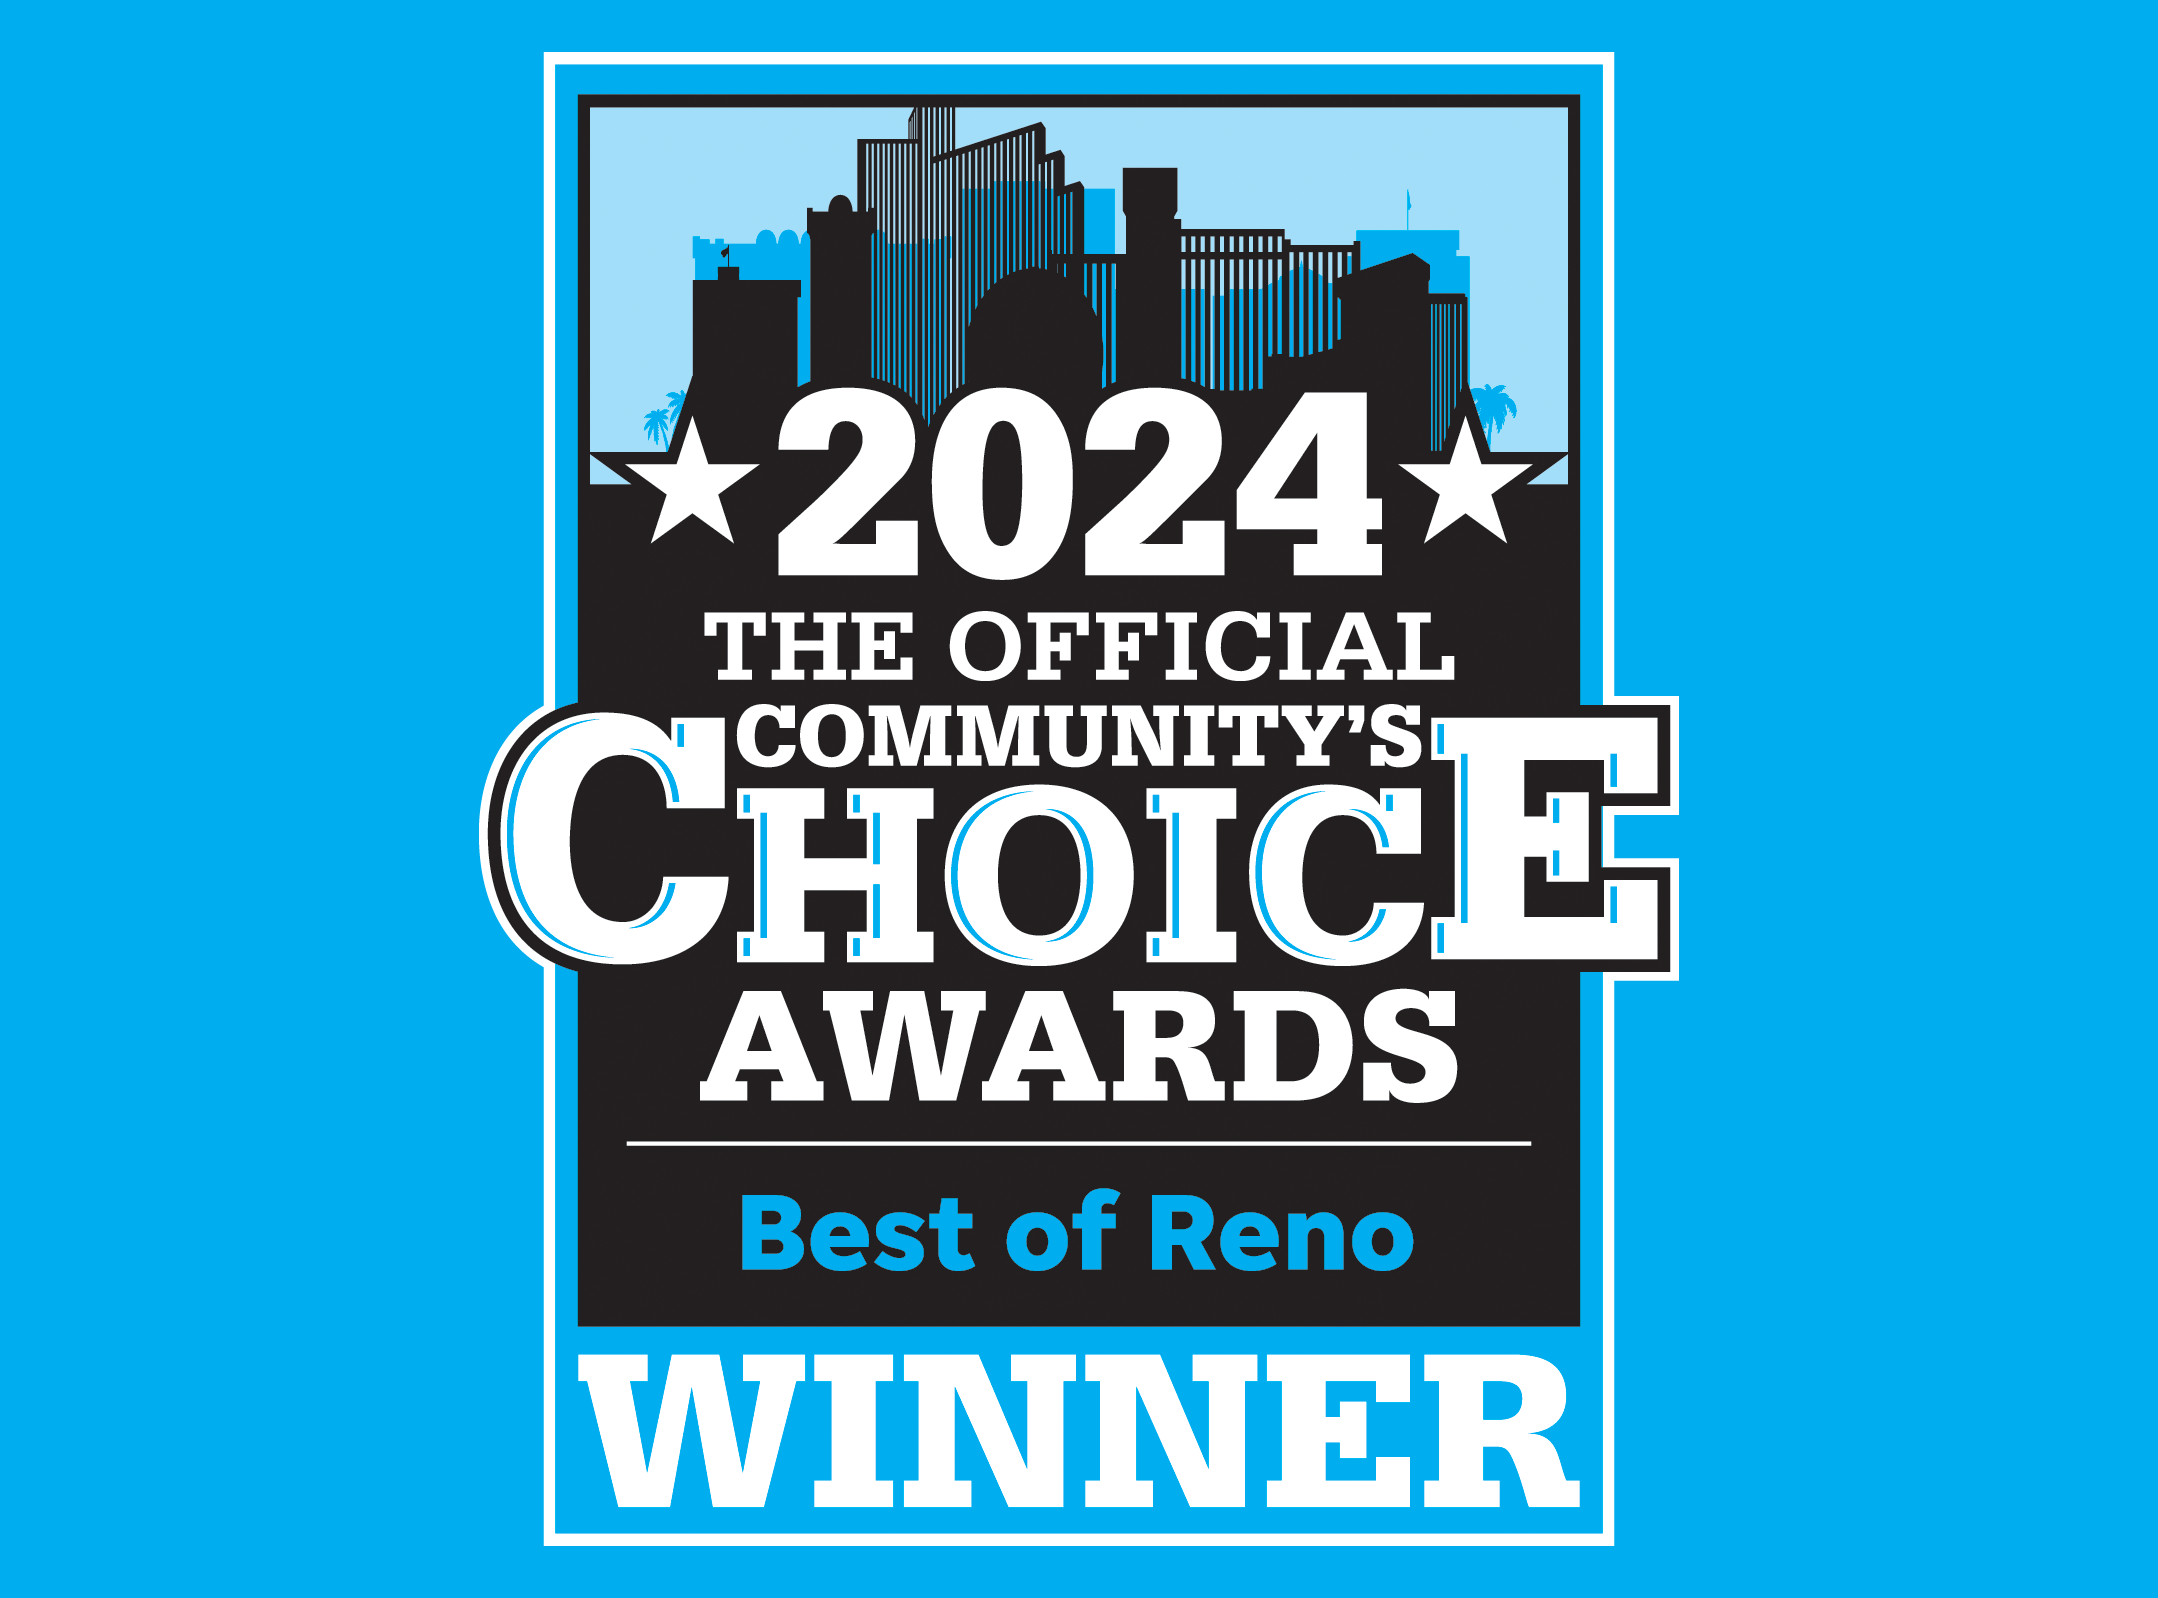 2024 the official community's choice awards best of reno winner